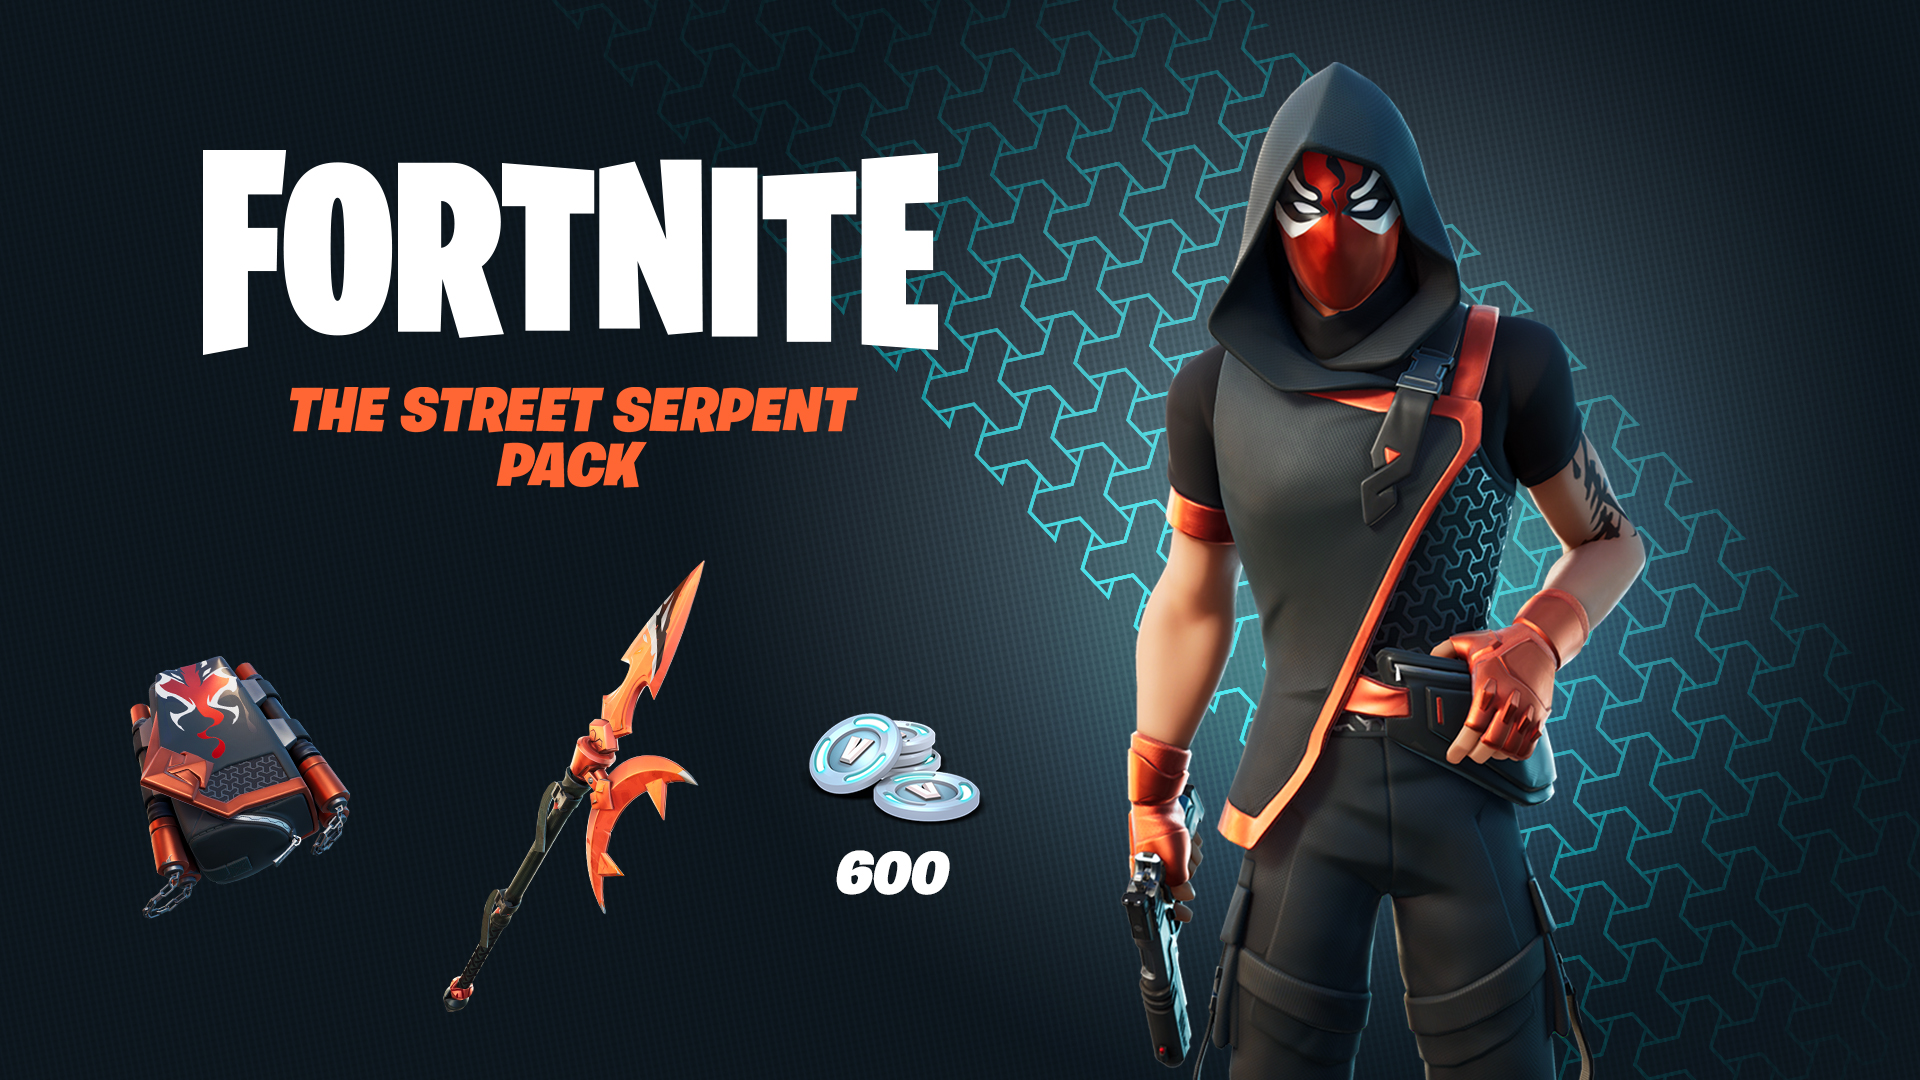 Fortnite Sweep The Streets With An Unavoidable Gaze Grab The Street Serpent Pack And Get 600 V Bucks With It Available In The Shop Now T Co Uuh44ivq0w